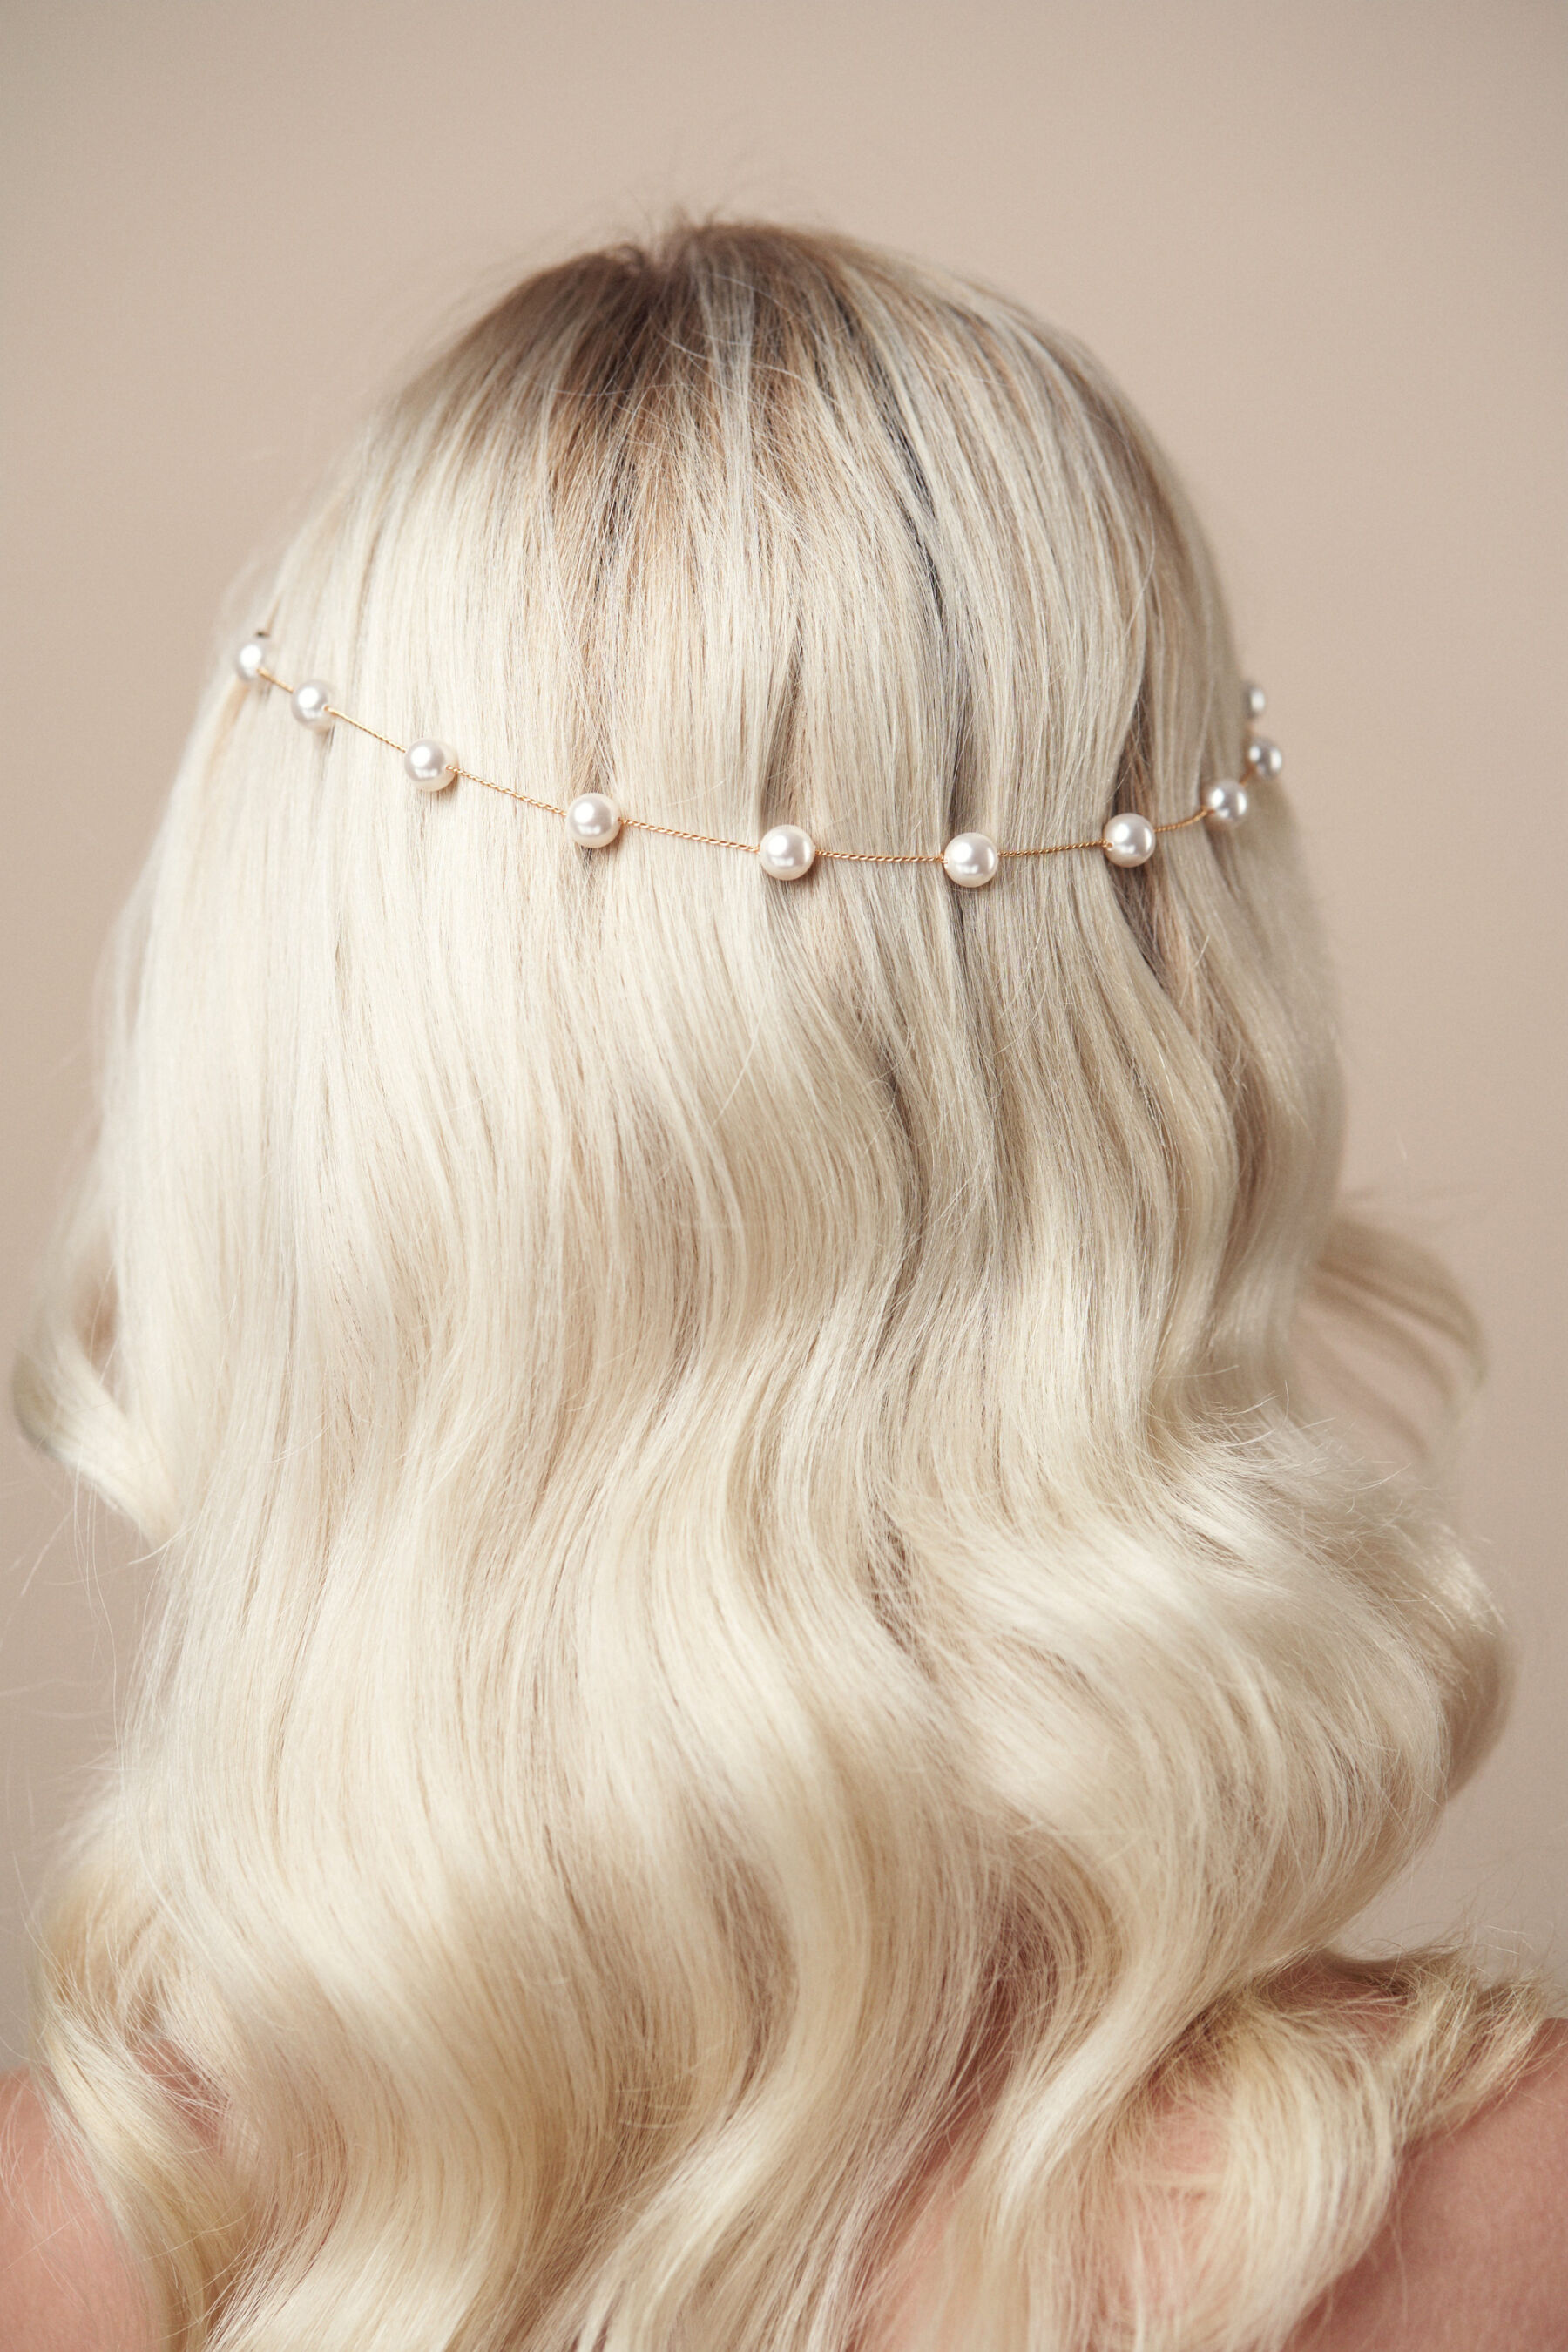 Luxury pearl headpiece for the back of the head by Debbie Carlisle